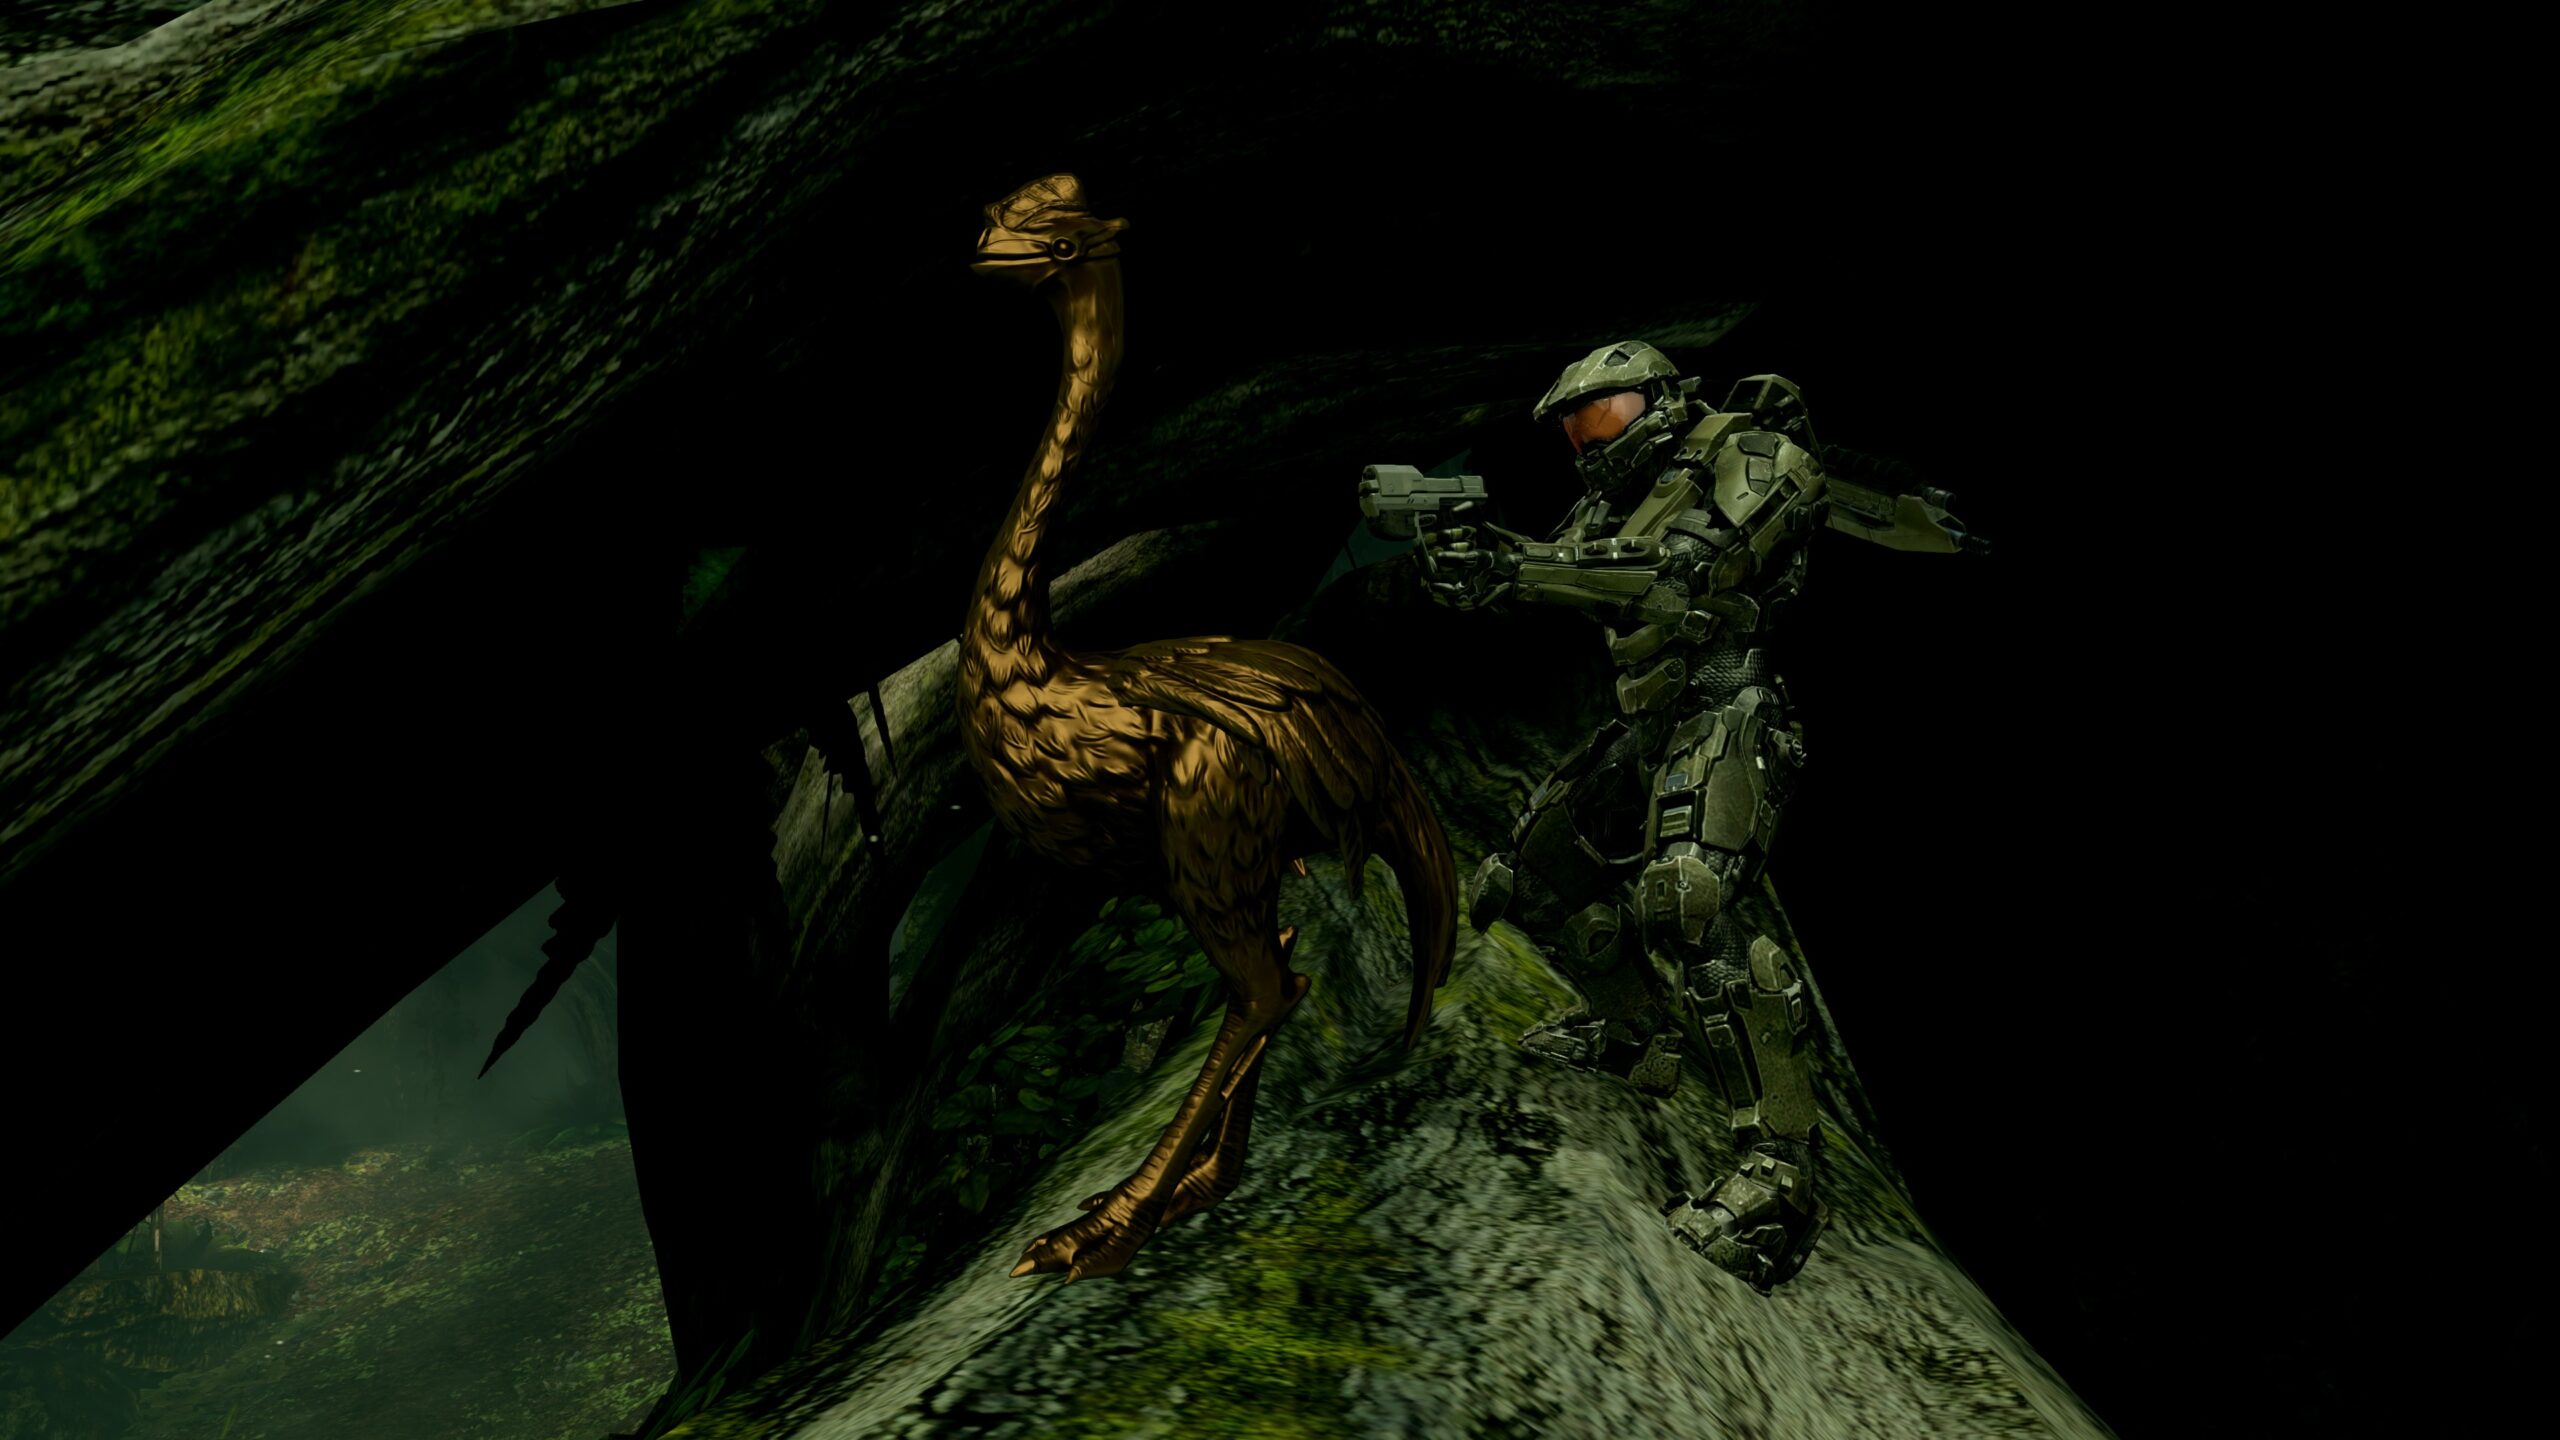 Halo 4 screenshot of the Master Chief with a moa statue